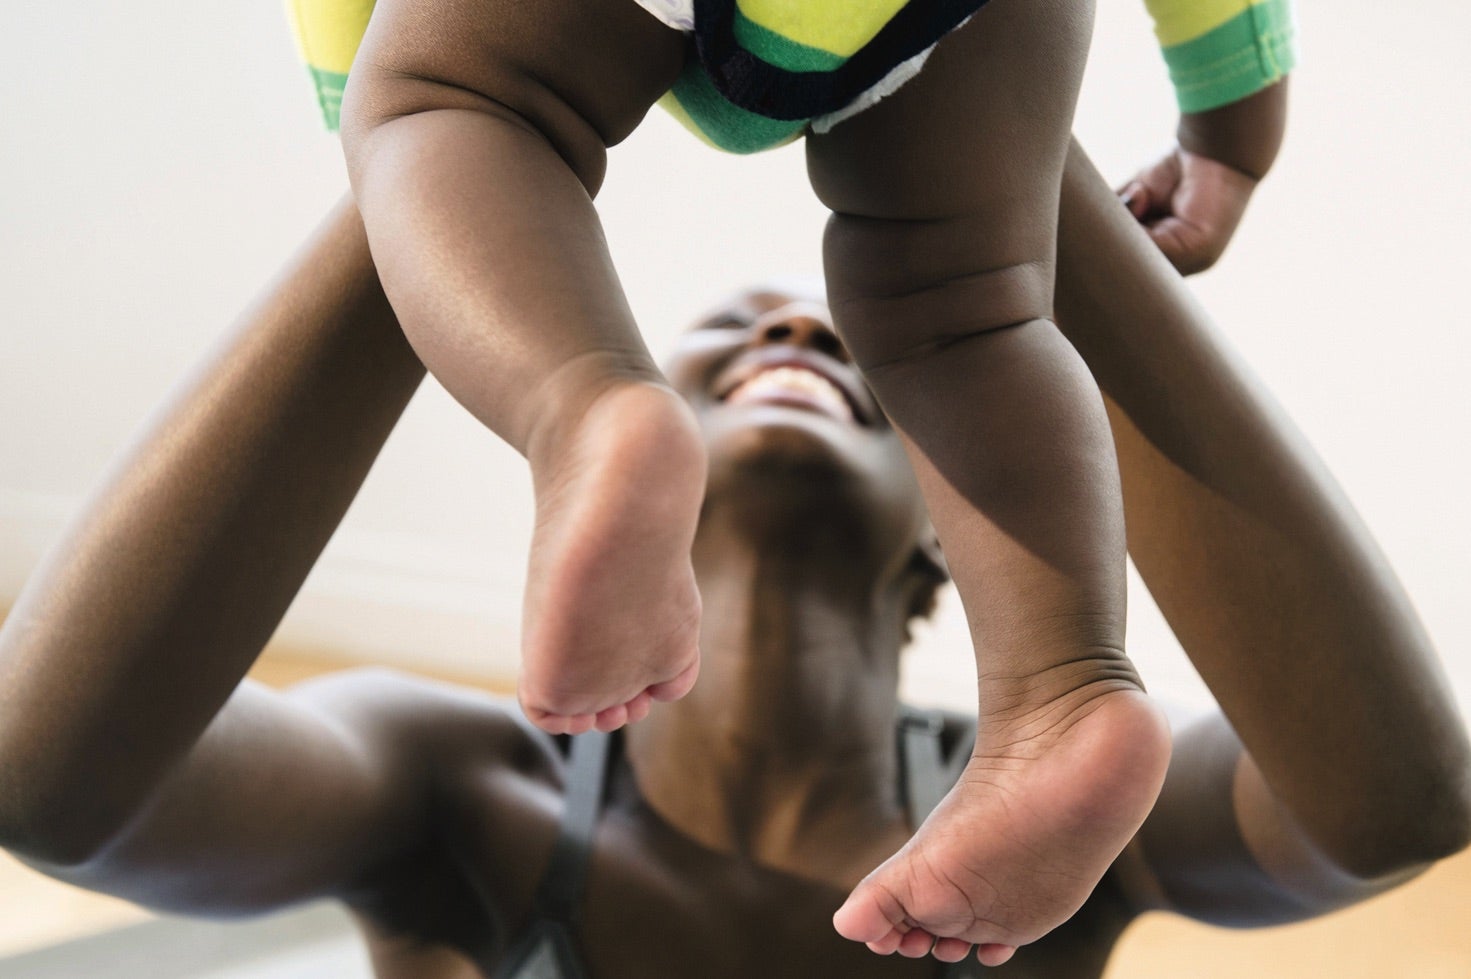 So You're Ready To Be A Mom? Here's Four Ways To Get Your Body Ready